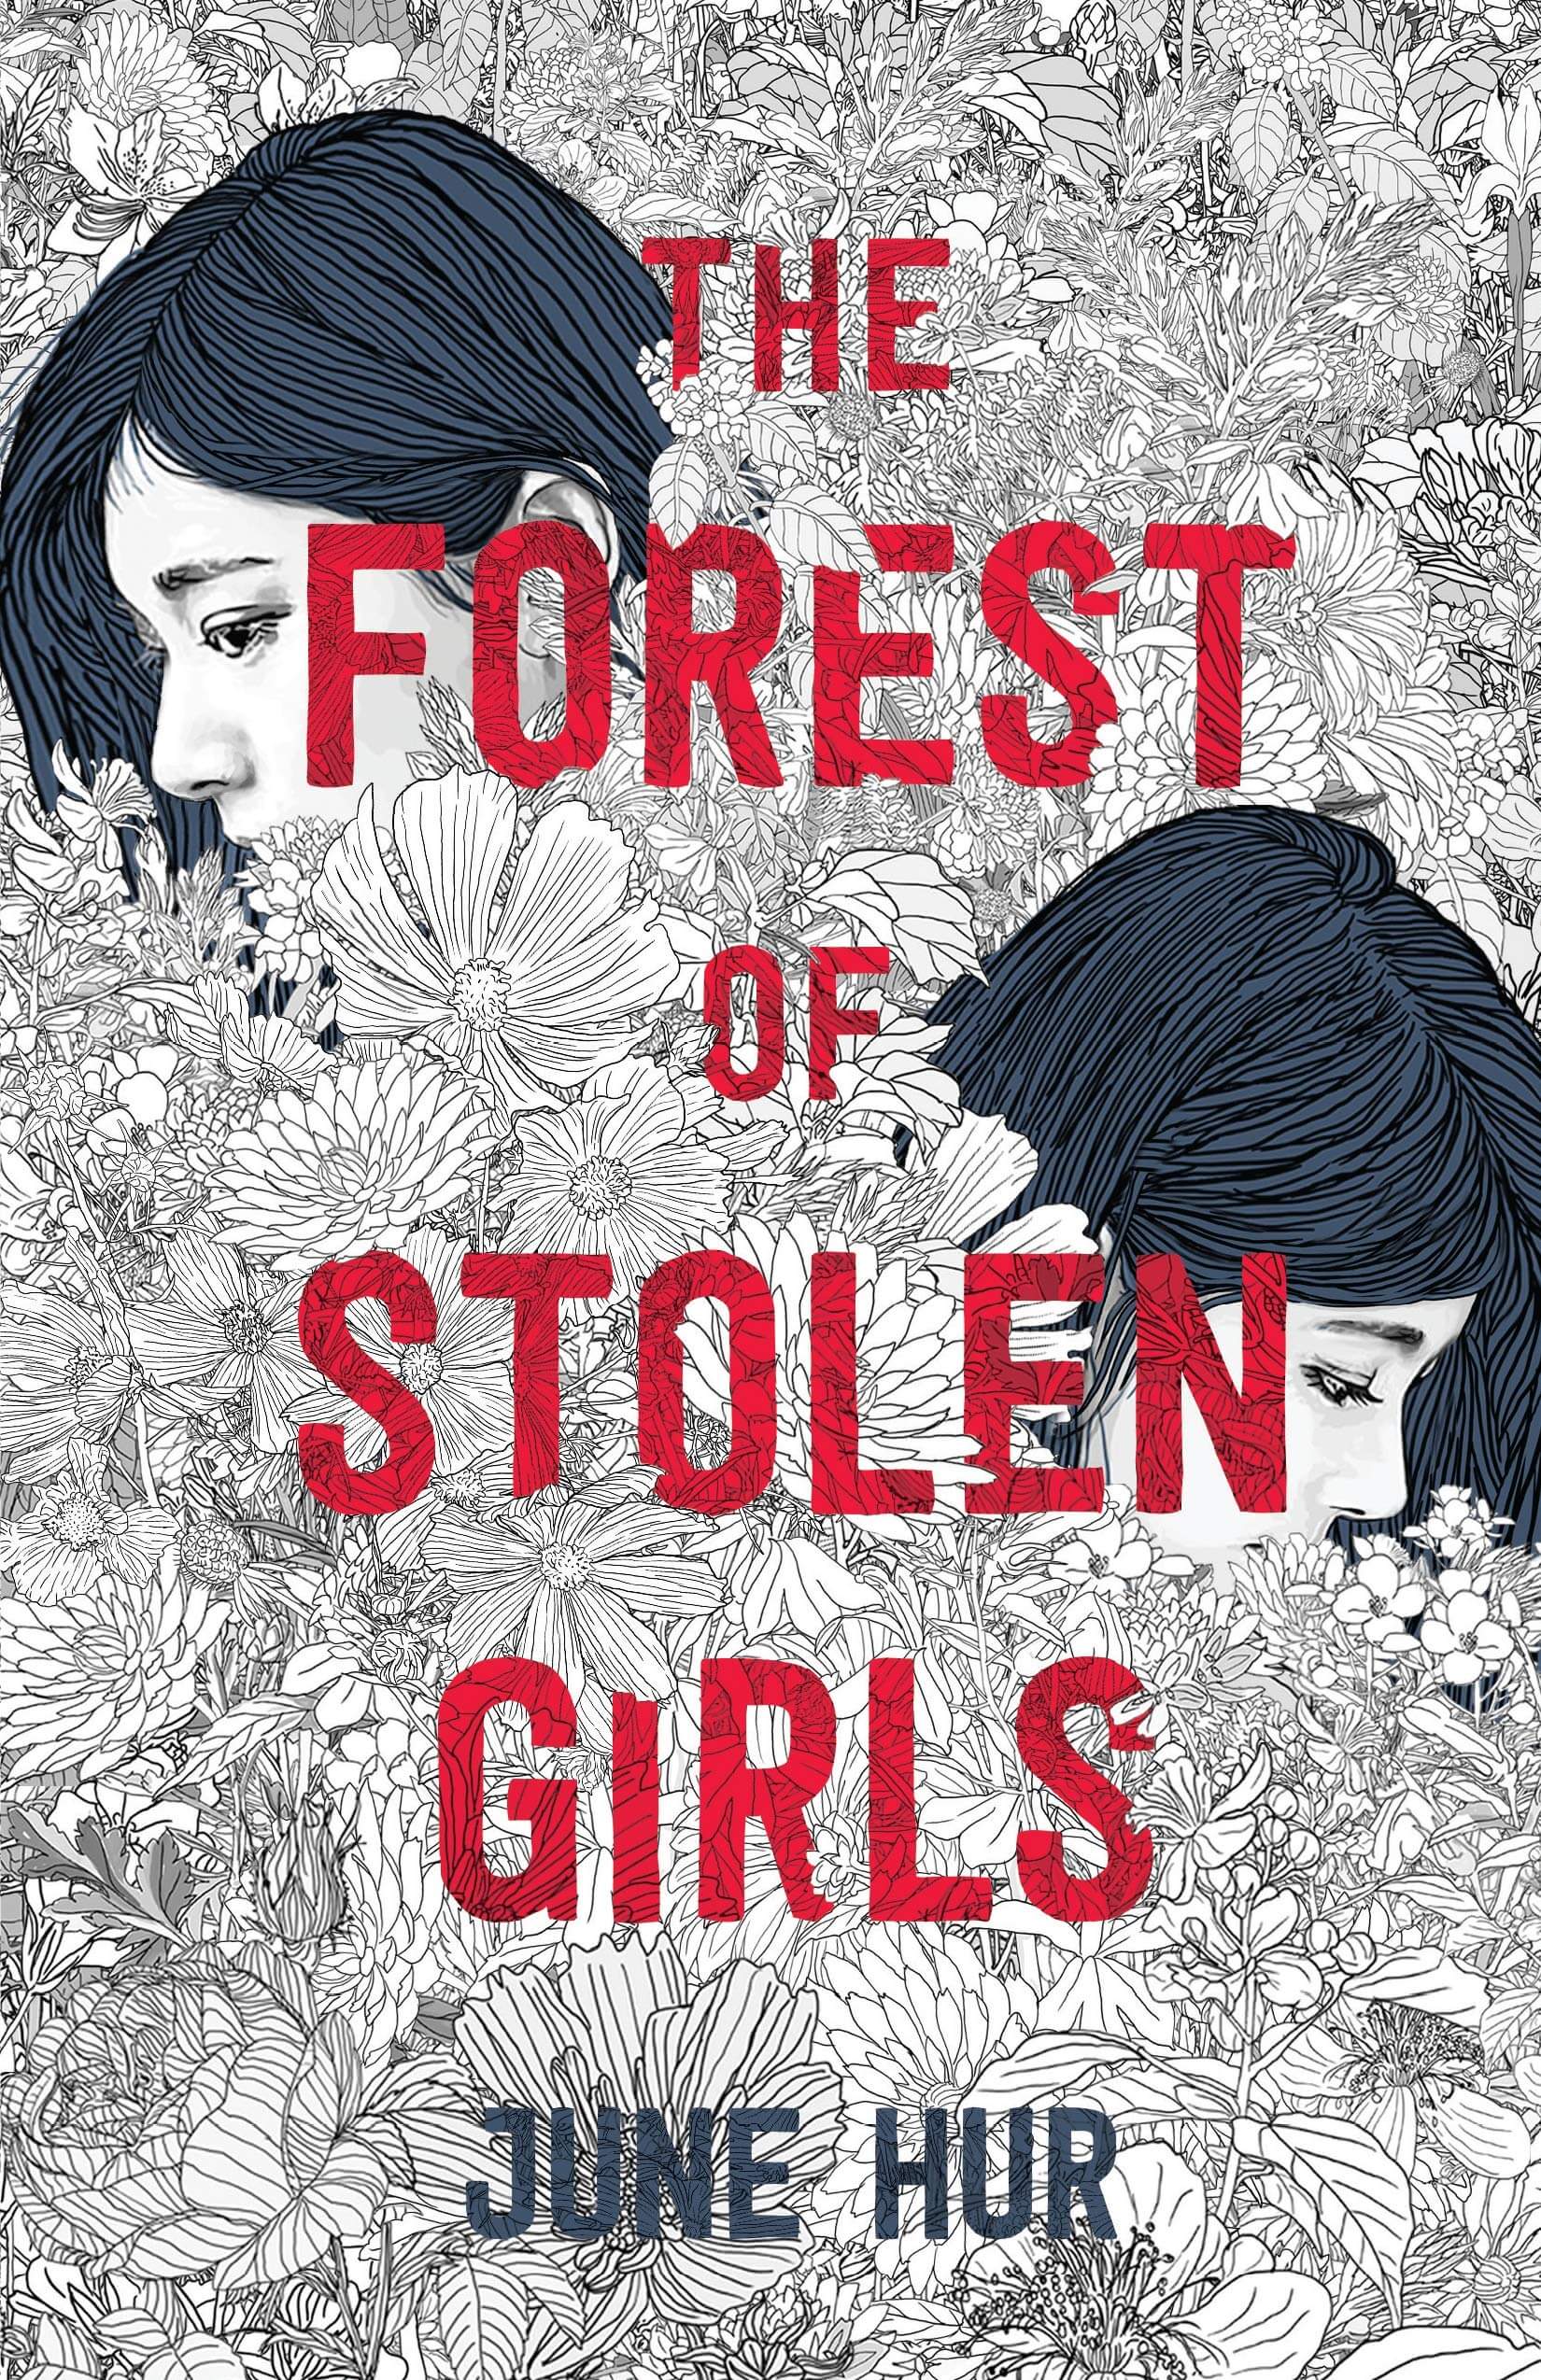 Cover of the forest of stolen girls by june hur. The heads of two women are peaking out of a file of black and white flowers